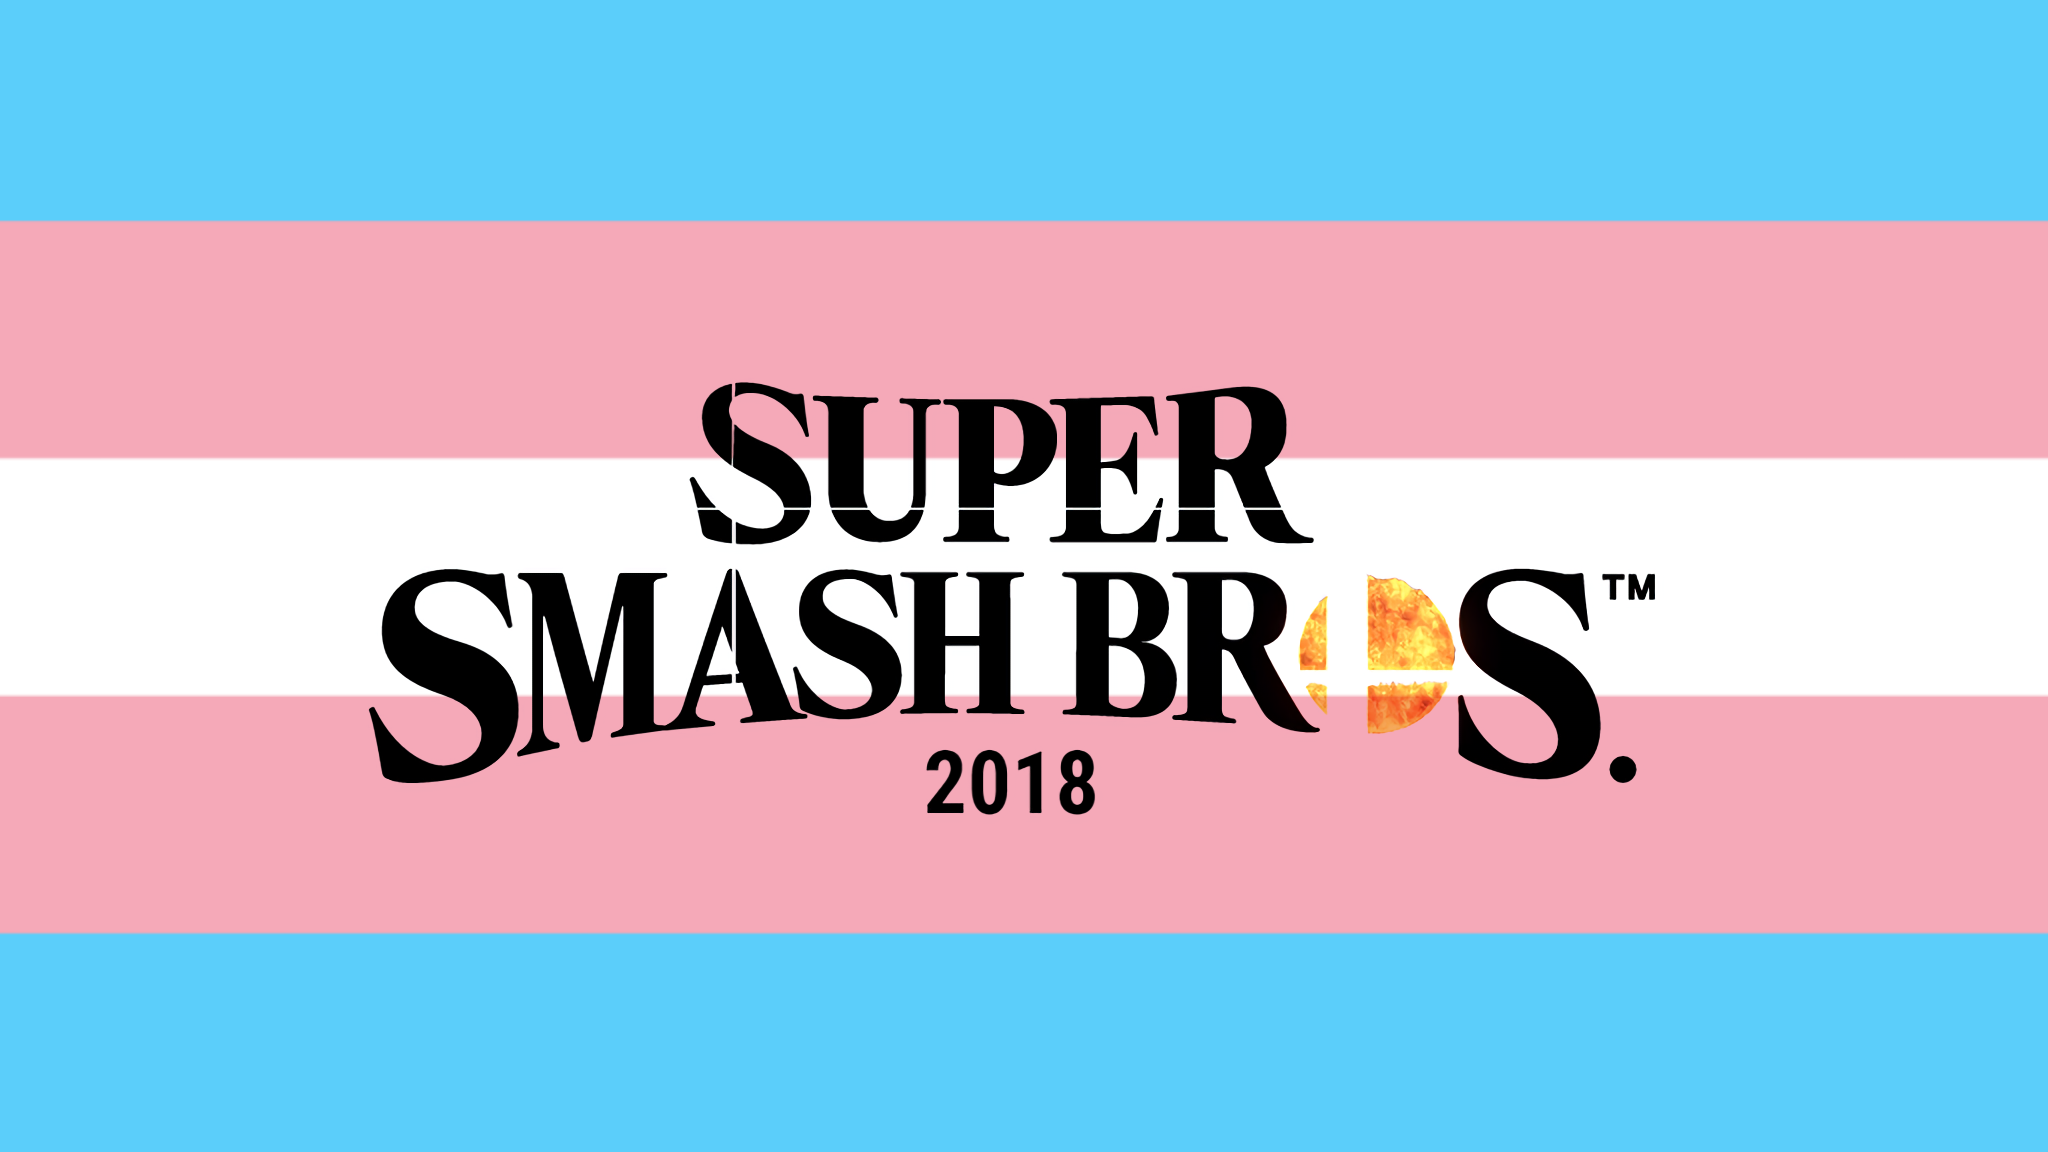 When you want to have a trans pride wallpaper, but are also hyped